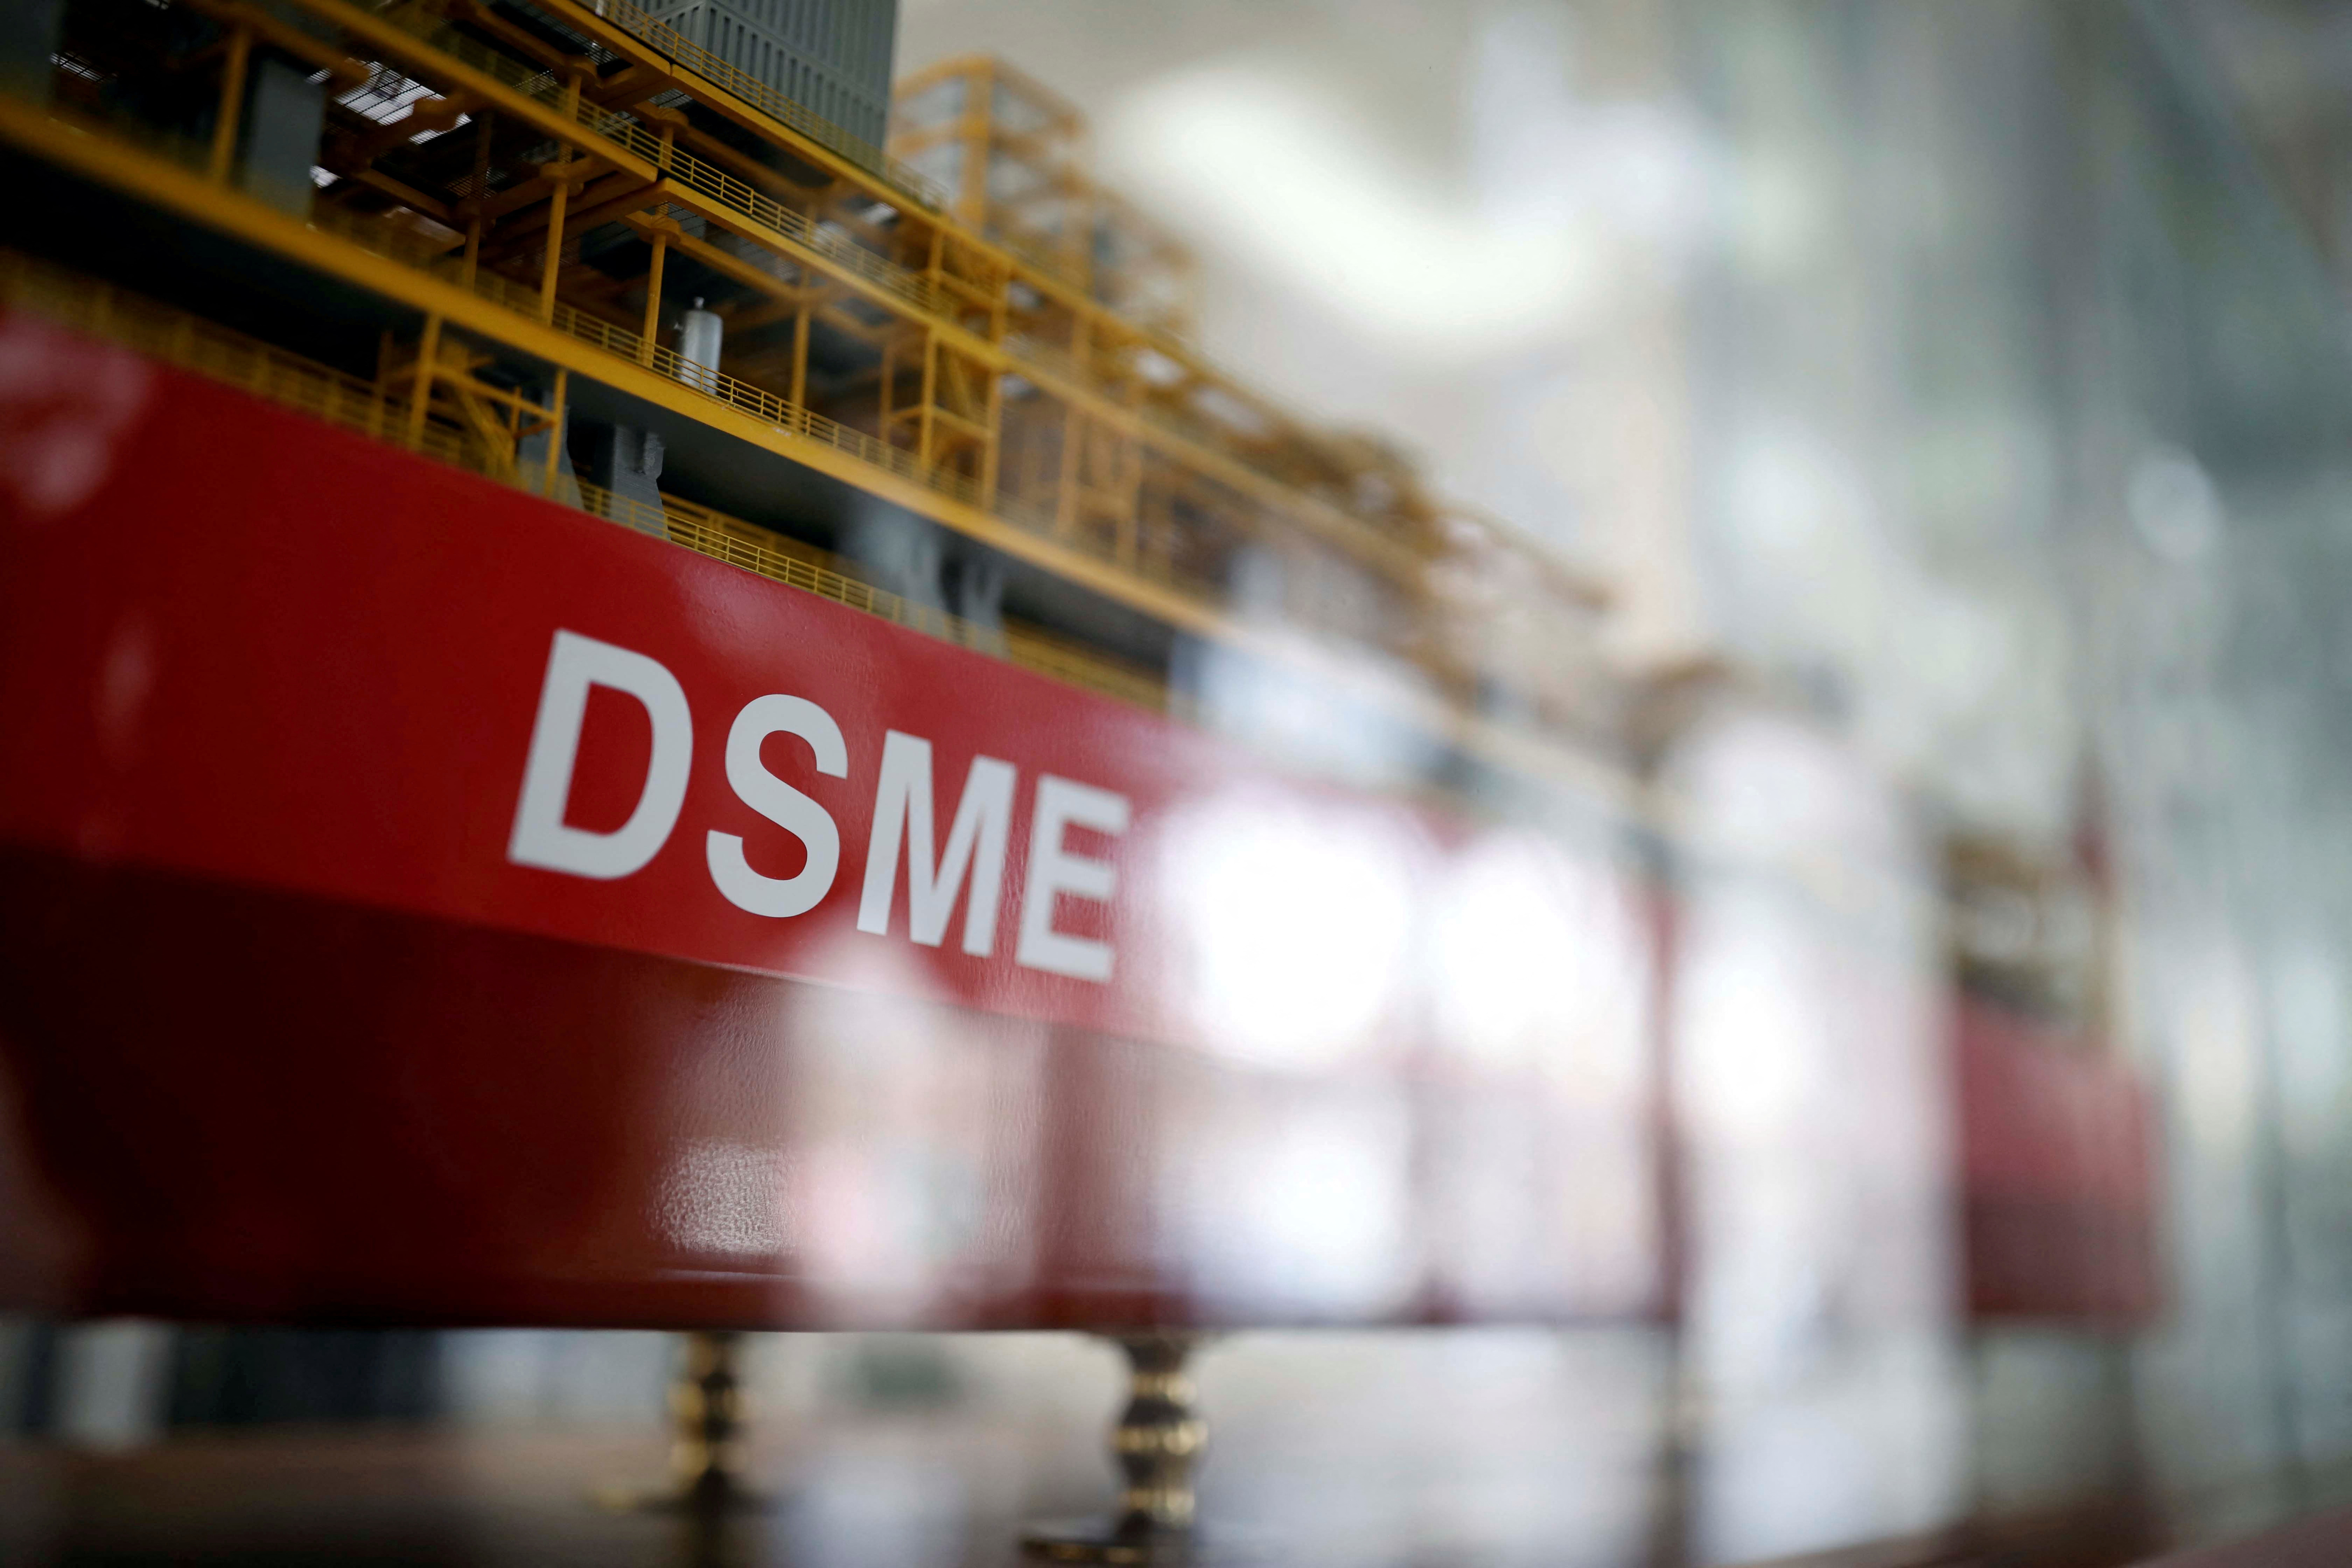 The name of Daewoo Shipbuilding & Marine Engineering Co is seen on a replica ship displayed at its building in Seoul, South Korea